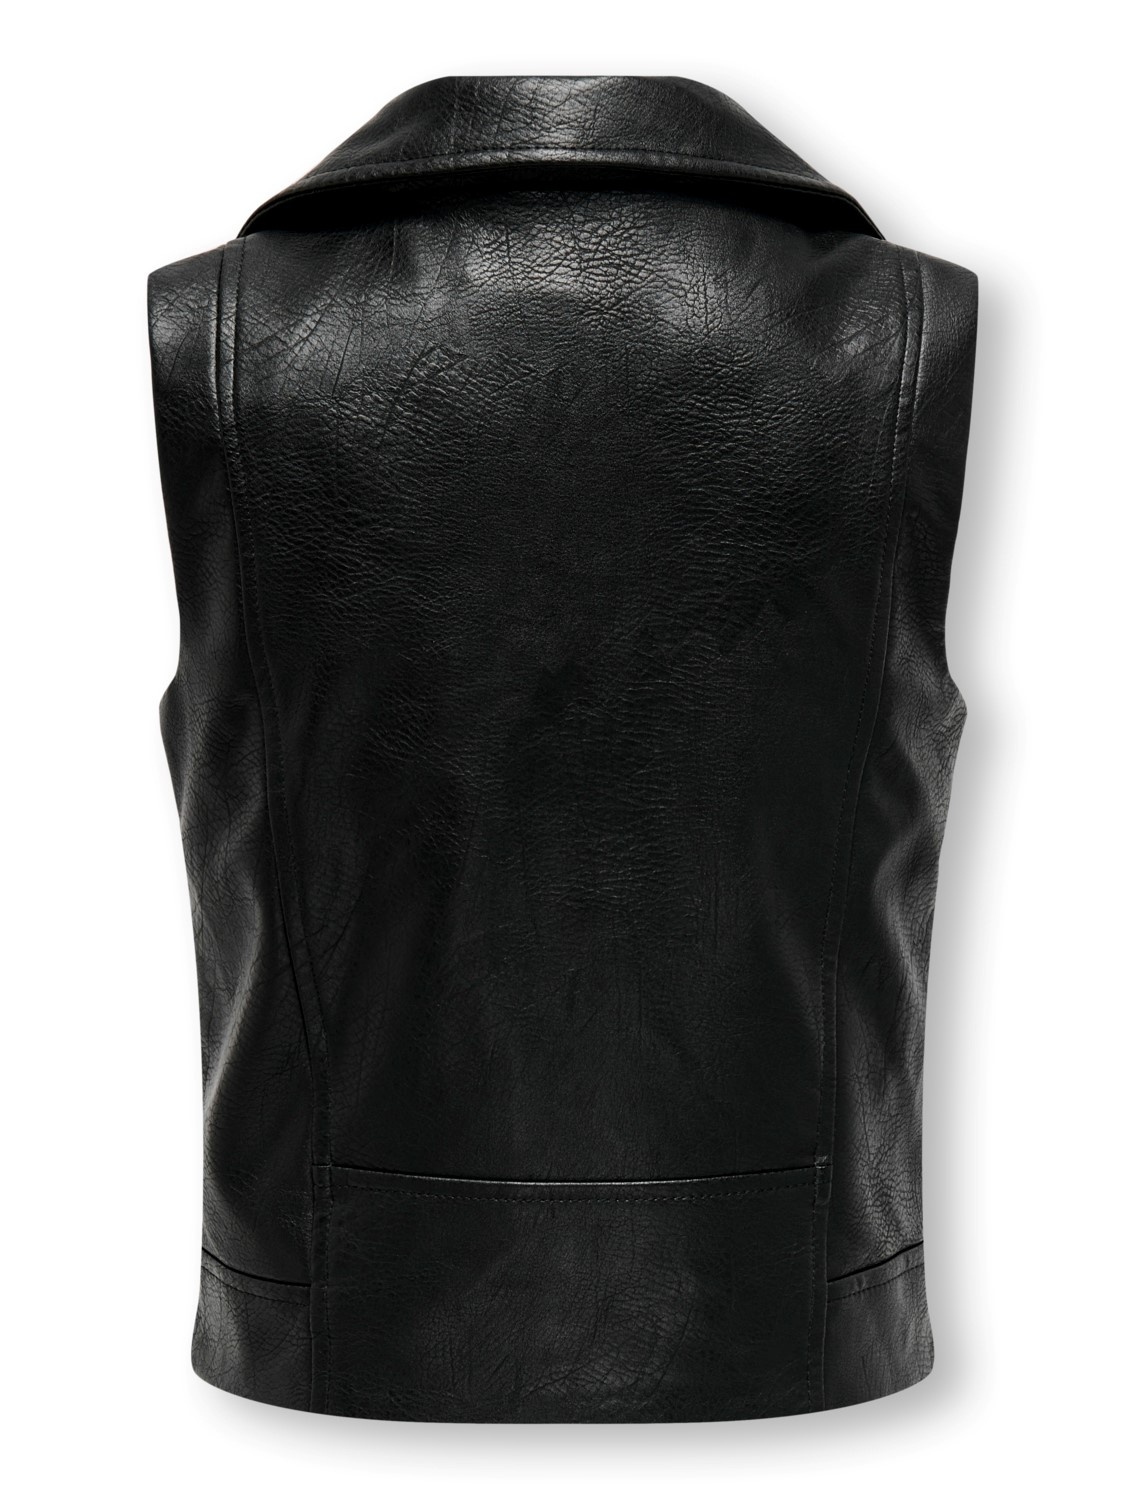 ONLY Gilet ONLY vera faux leather black